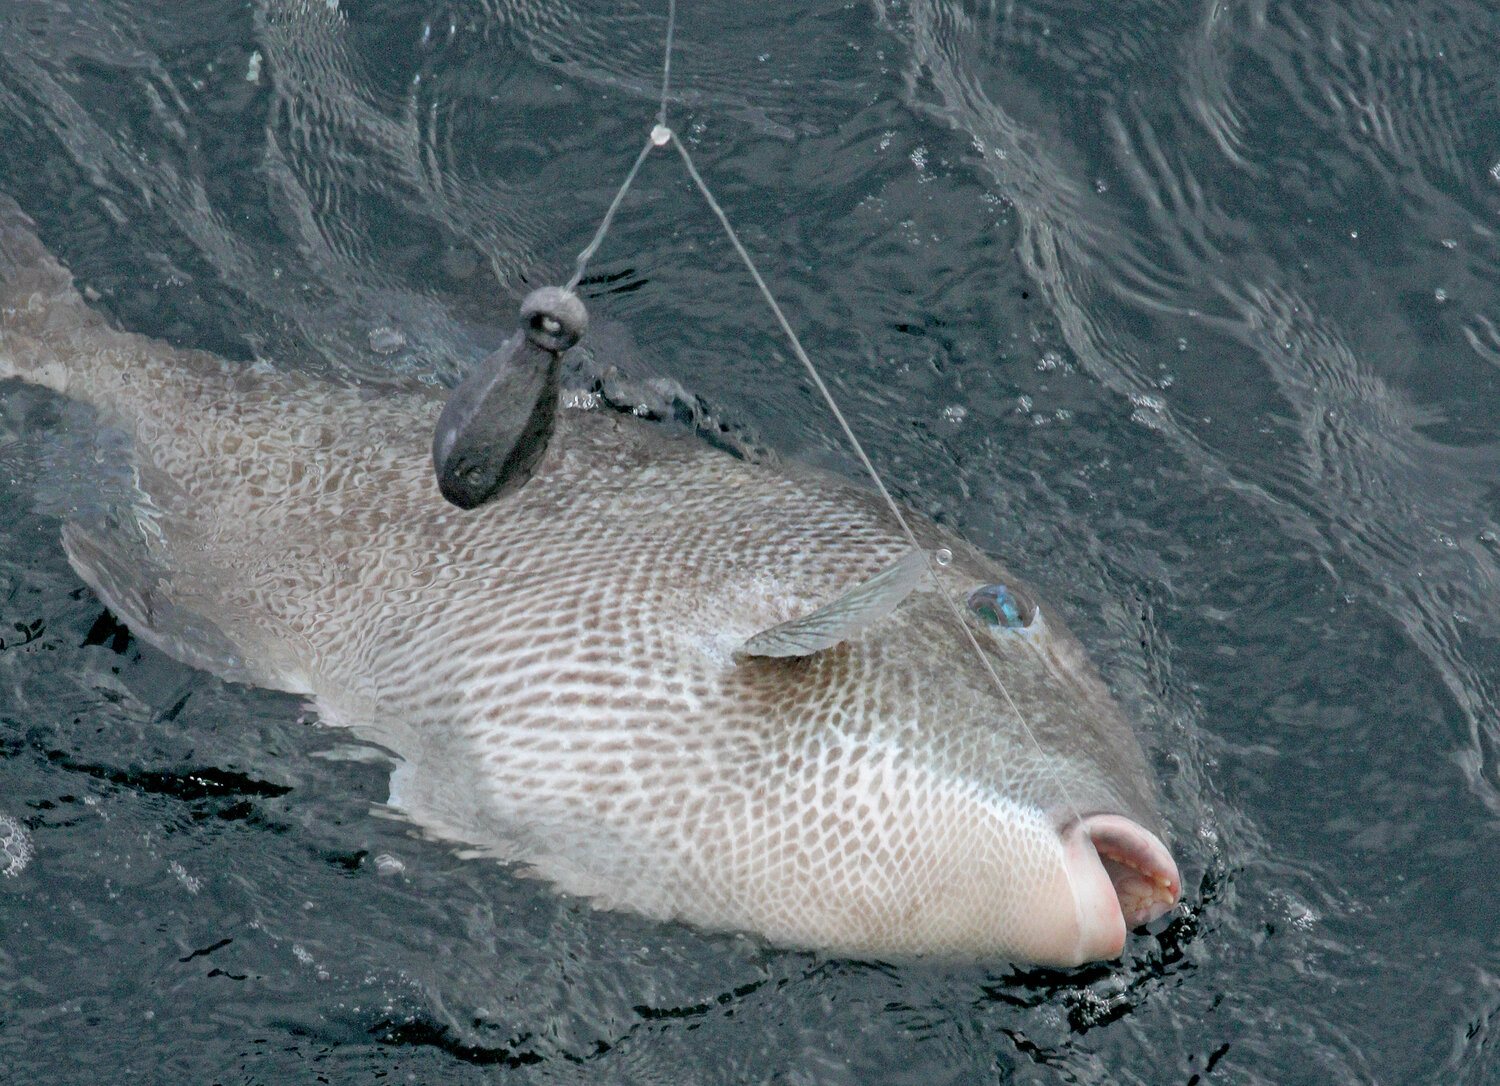 The gray triggerfish season in the Gulf opens on Aug. 1 and runs through the end of the year.